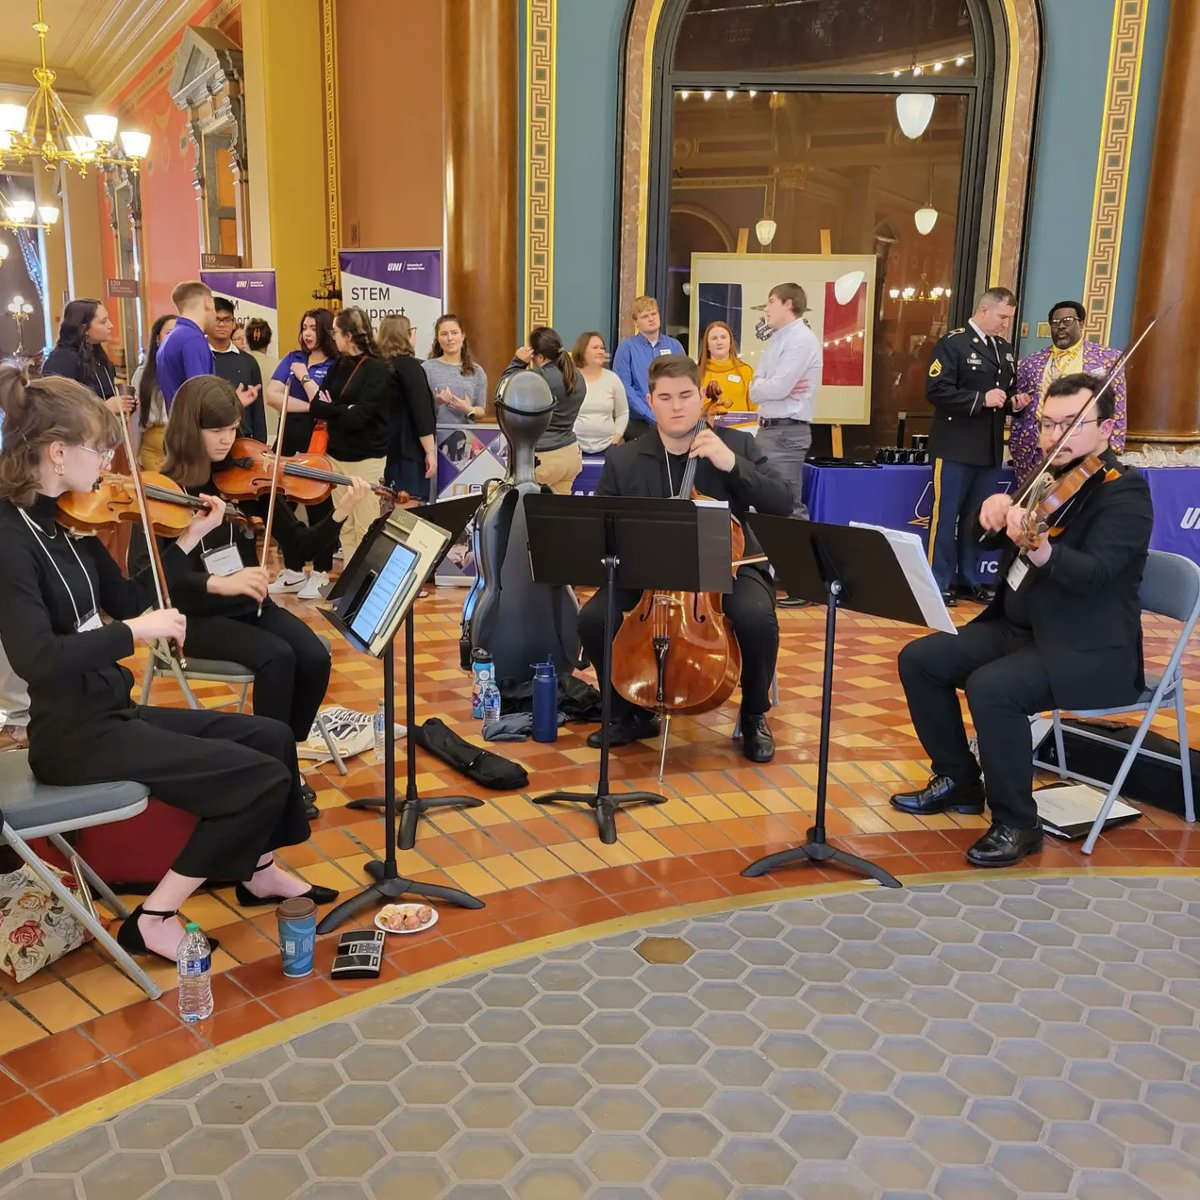 Our students are playing beautifully and representing the School of Music will at UNI Day at the Capitol in Des Moines today! TC and TK are big fans! #1UNI 💜💛🎶